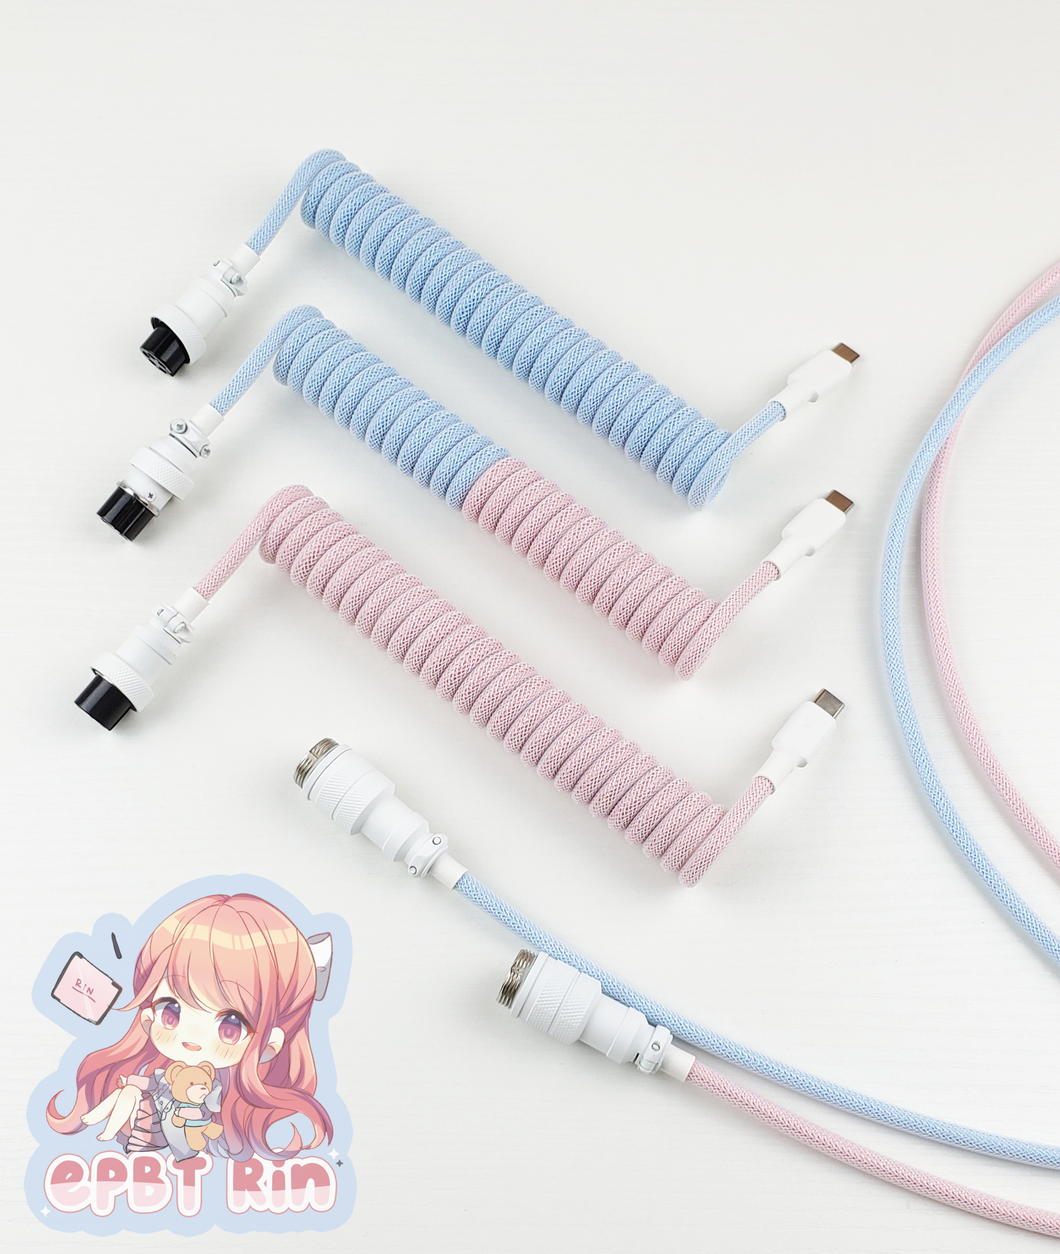 Epbt Rin's Official Coiled Cable